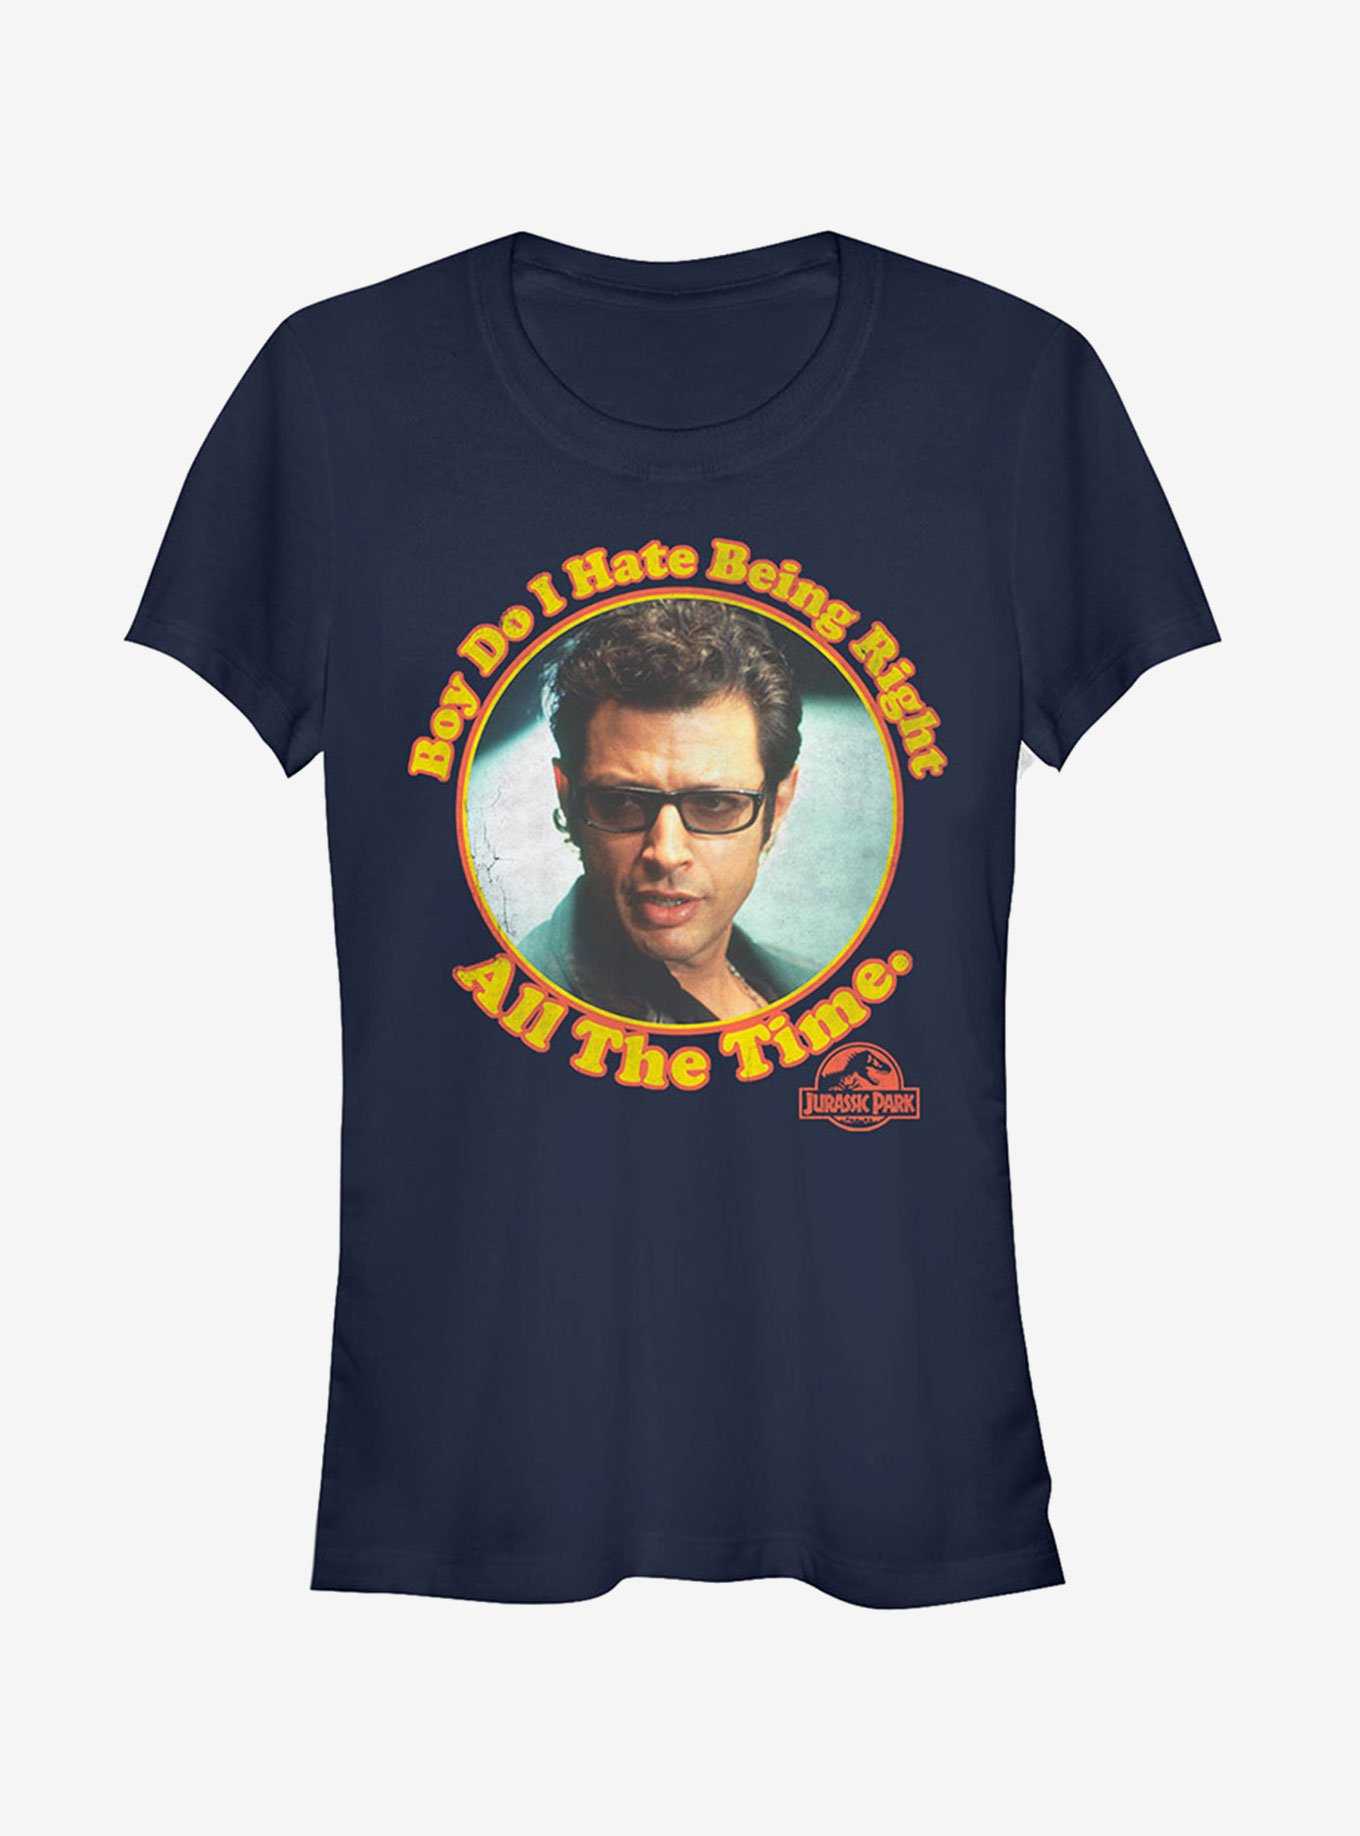 Dr. Malcolm Right all the Time Girls T-Shirt, , hi-res